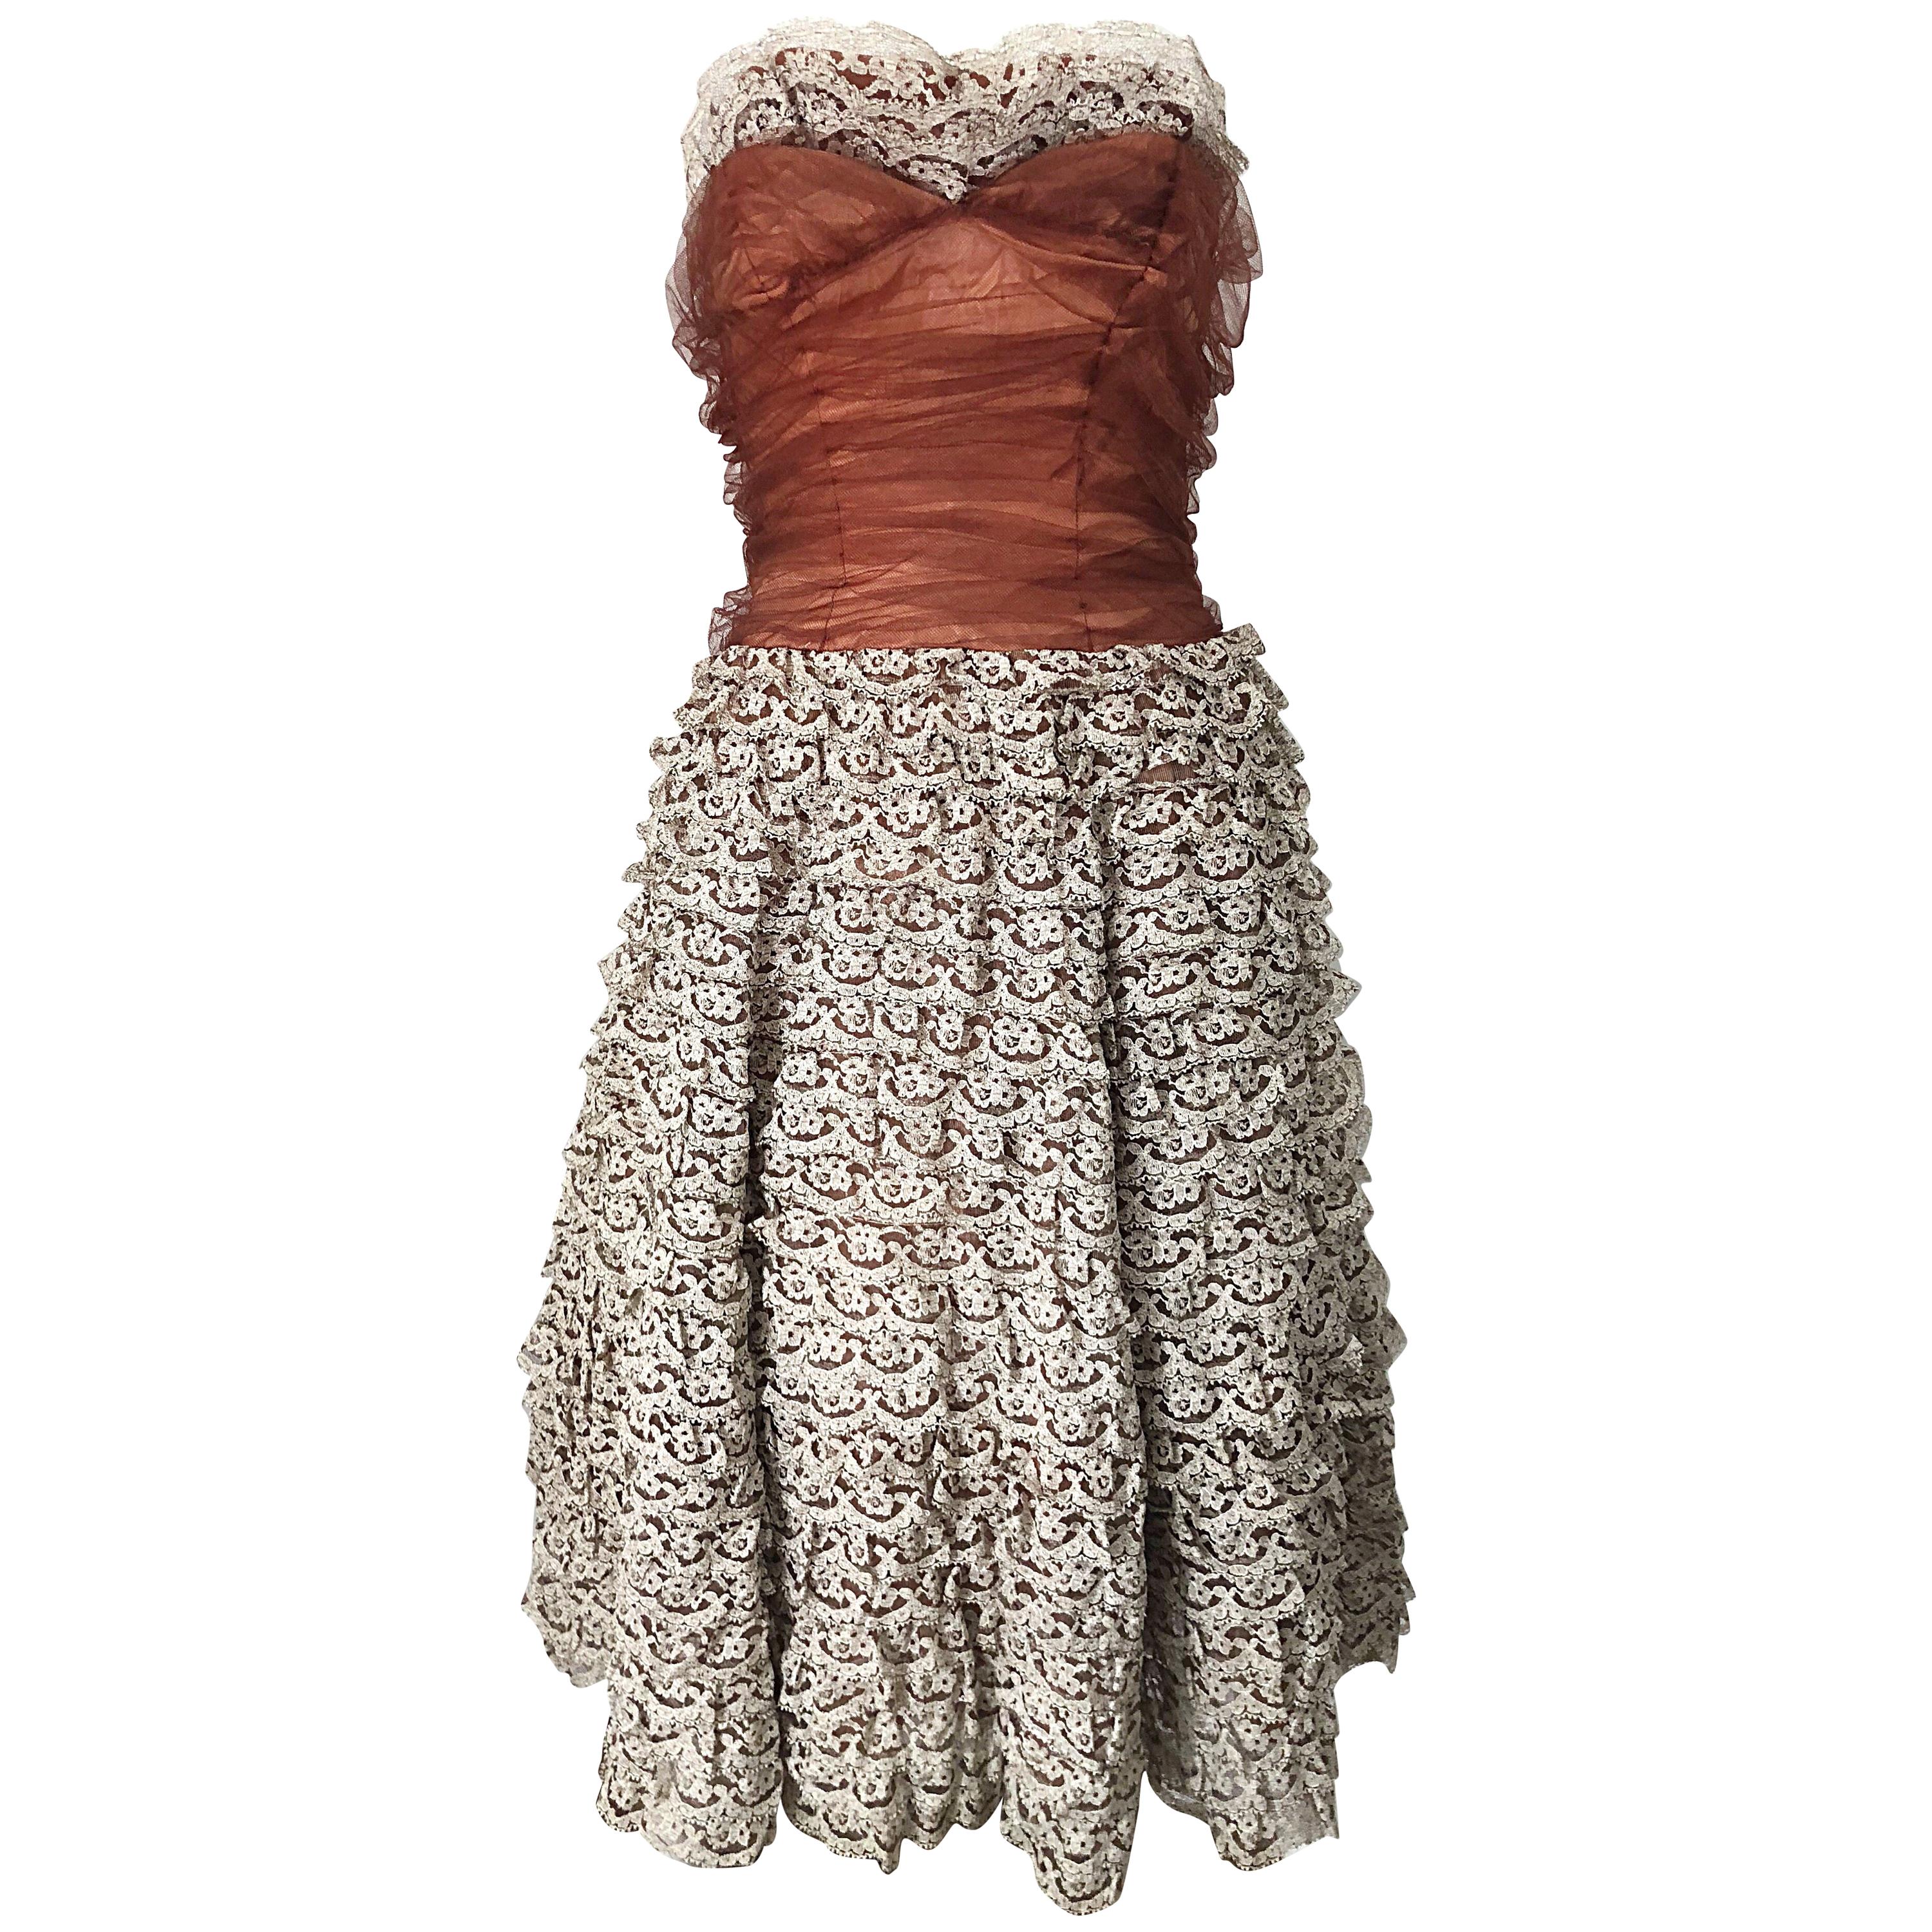 Stunning 1950s Demi Couture Taupe + Terra Cotta Vintage 50s Strapless Lace Dress For Sale